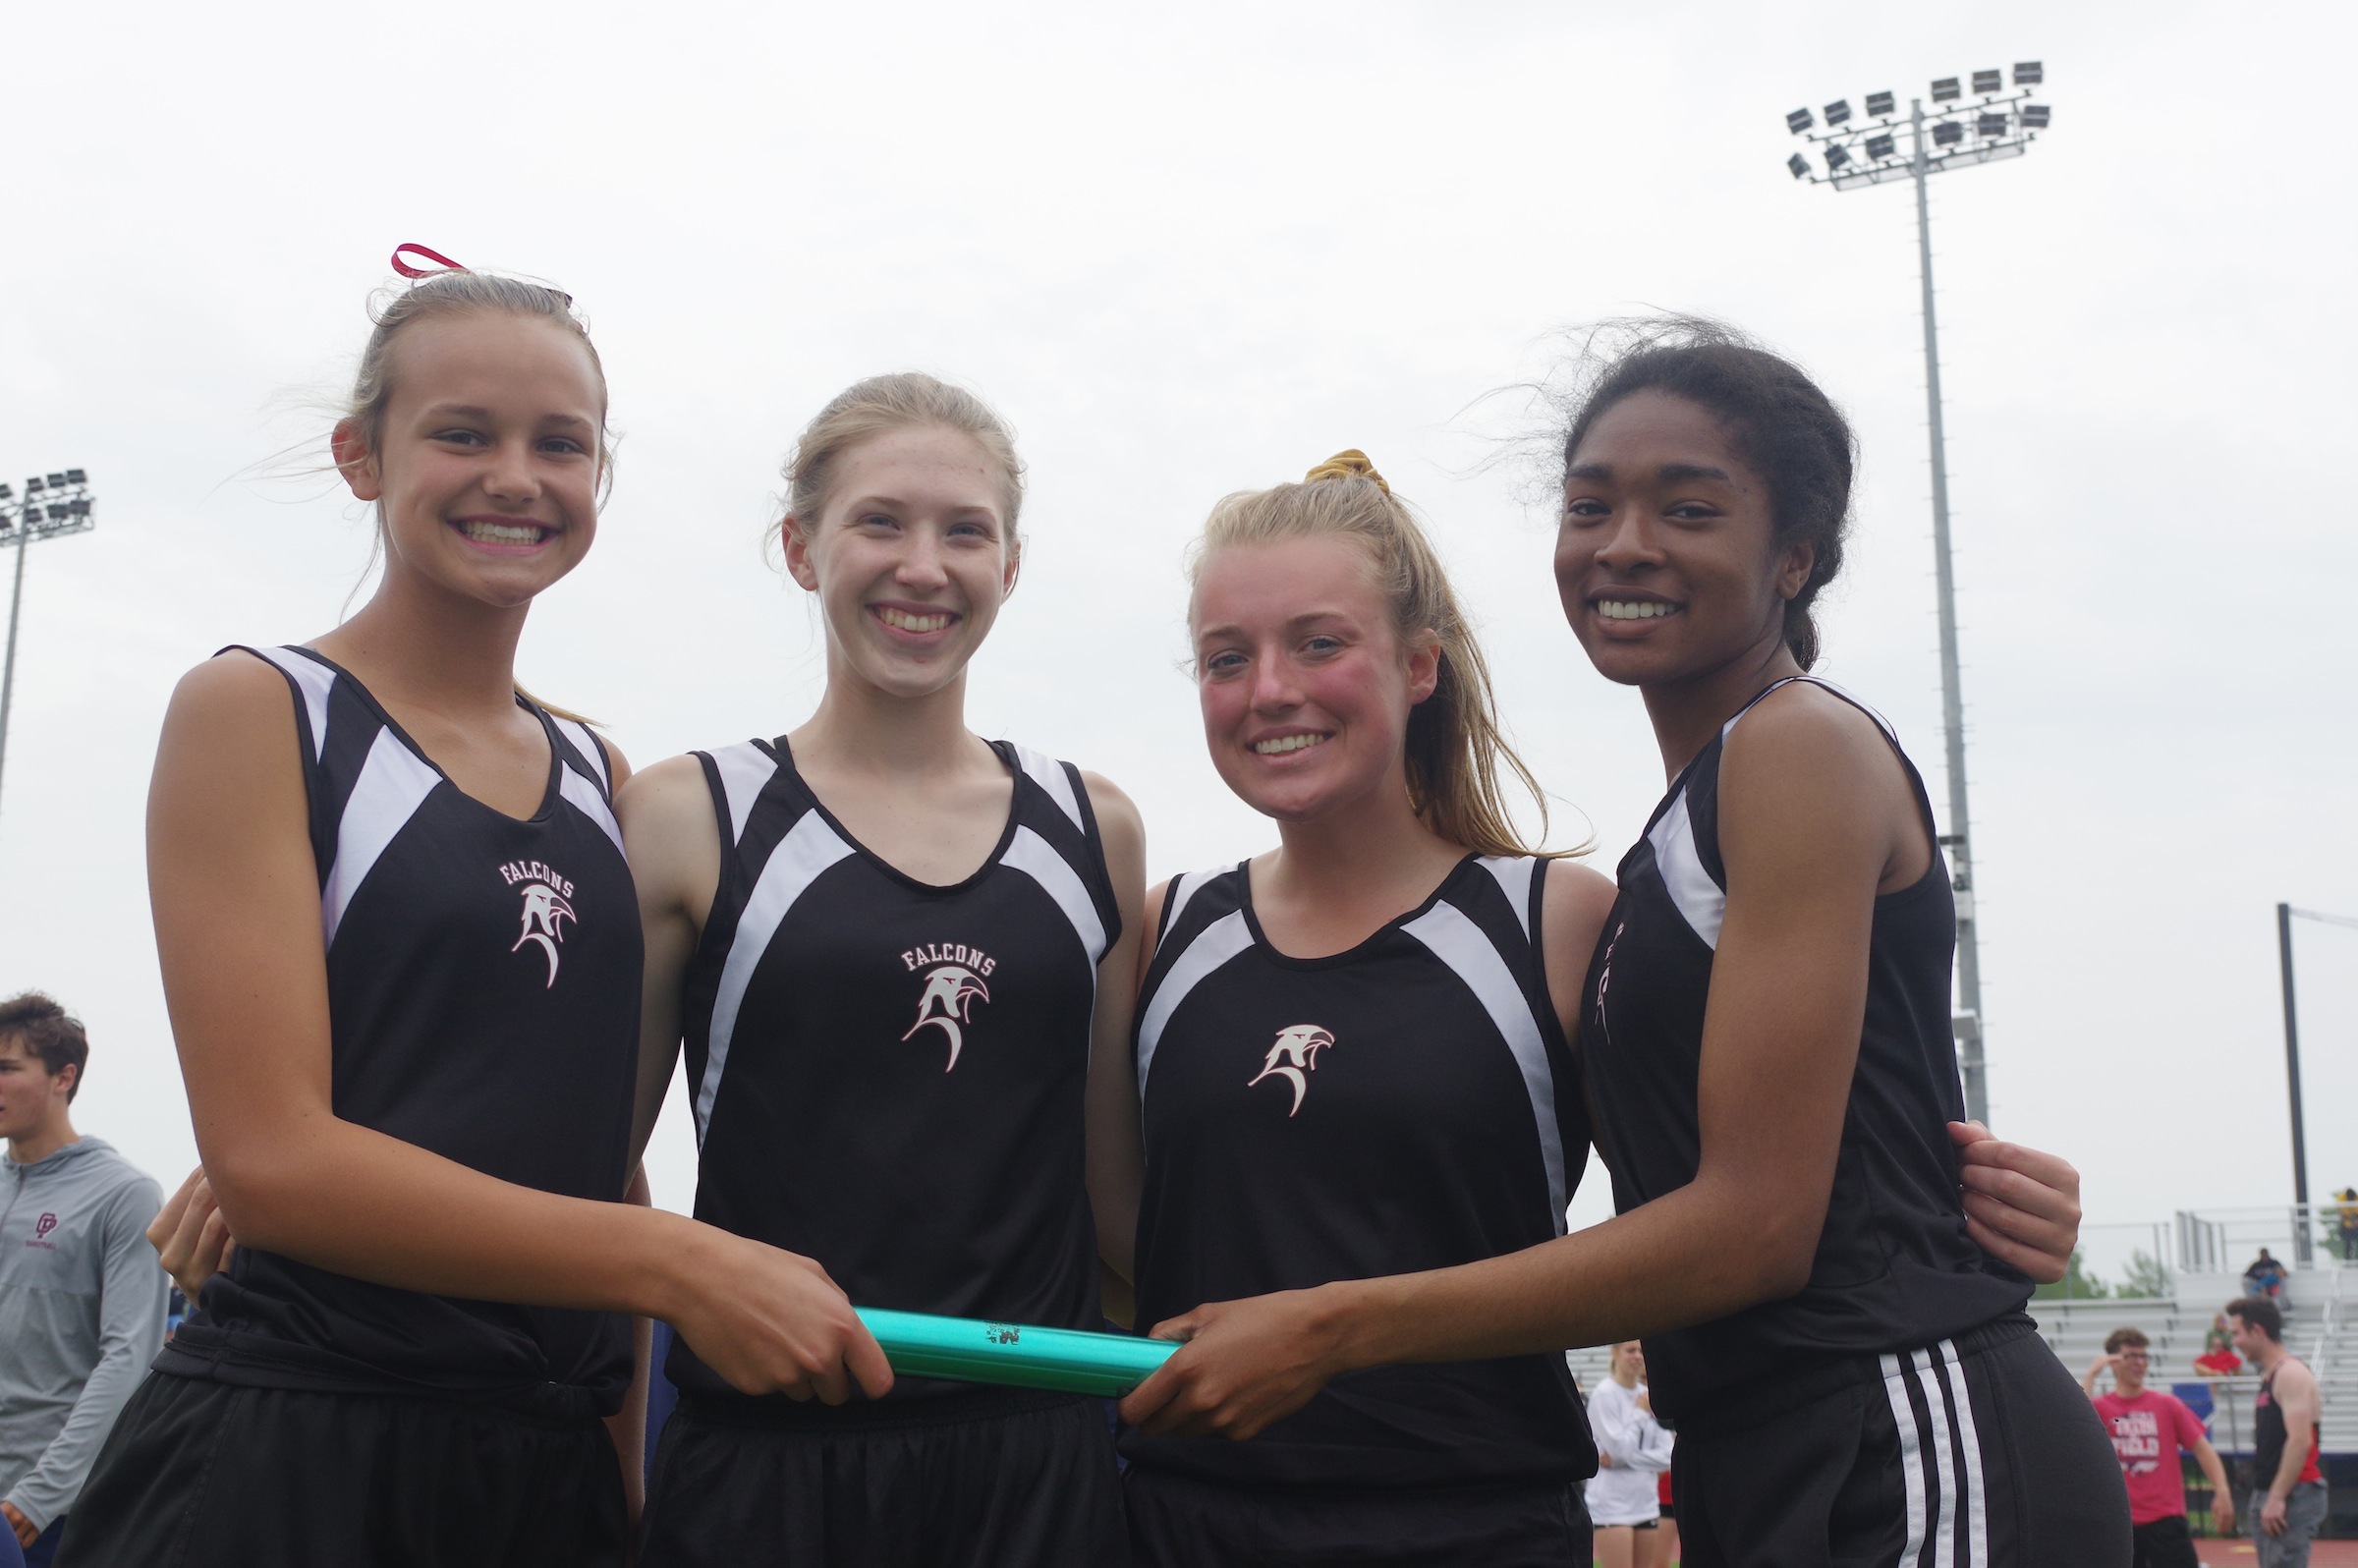 From left, the school record-breaking 4x400 relay team of Maddi Fike, MacKenzie Patterson, Abby Mason and Le'Gary Jackson pose at the Section VI meet last Saturday. (Photo by Larry Austin)